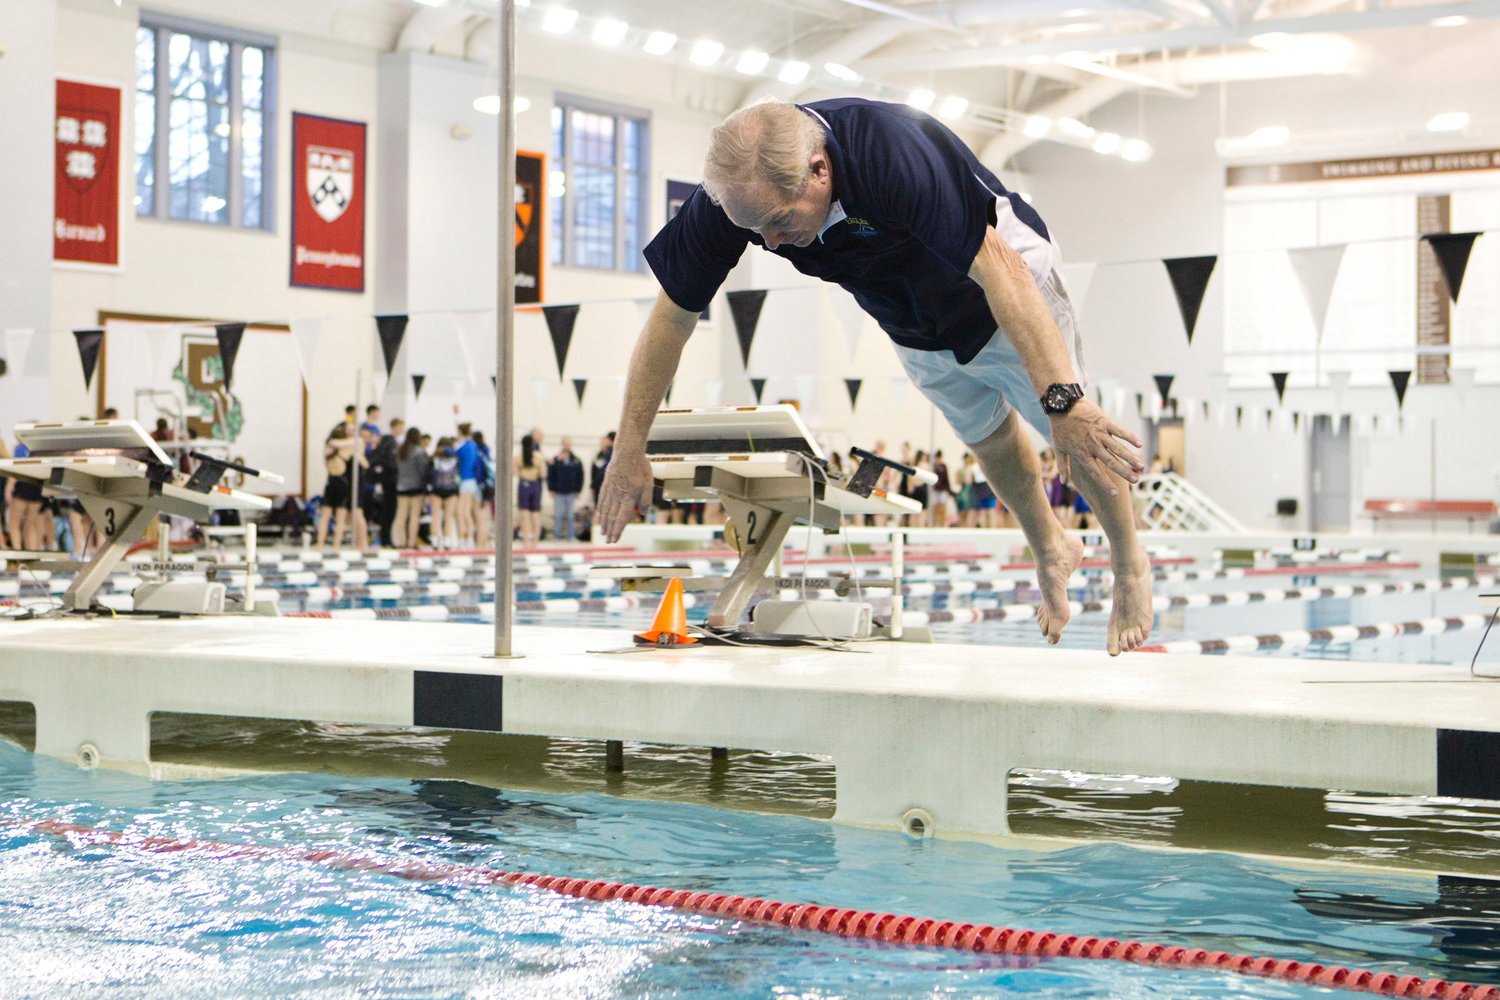 Barrington High School head coach Sandy Gorham takes a victory dive into the pool after his team won its sixth consecutive state championship, on Saturday.